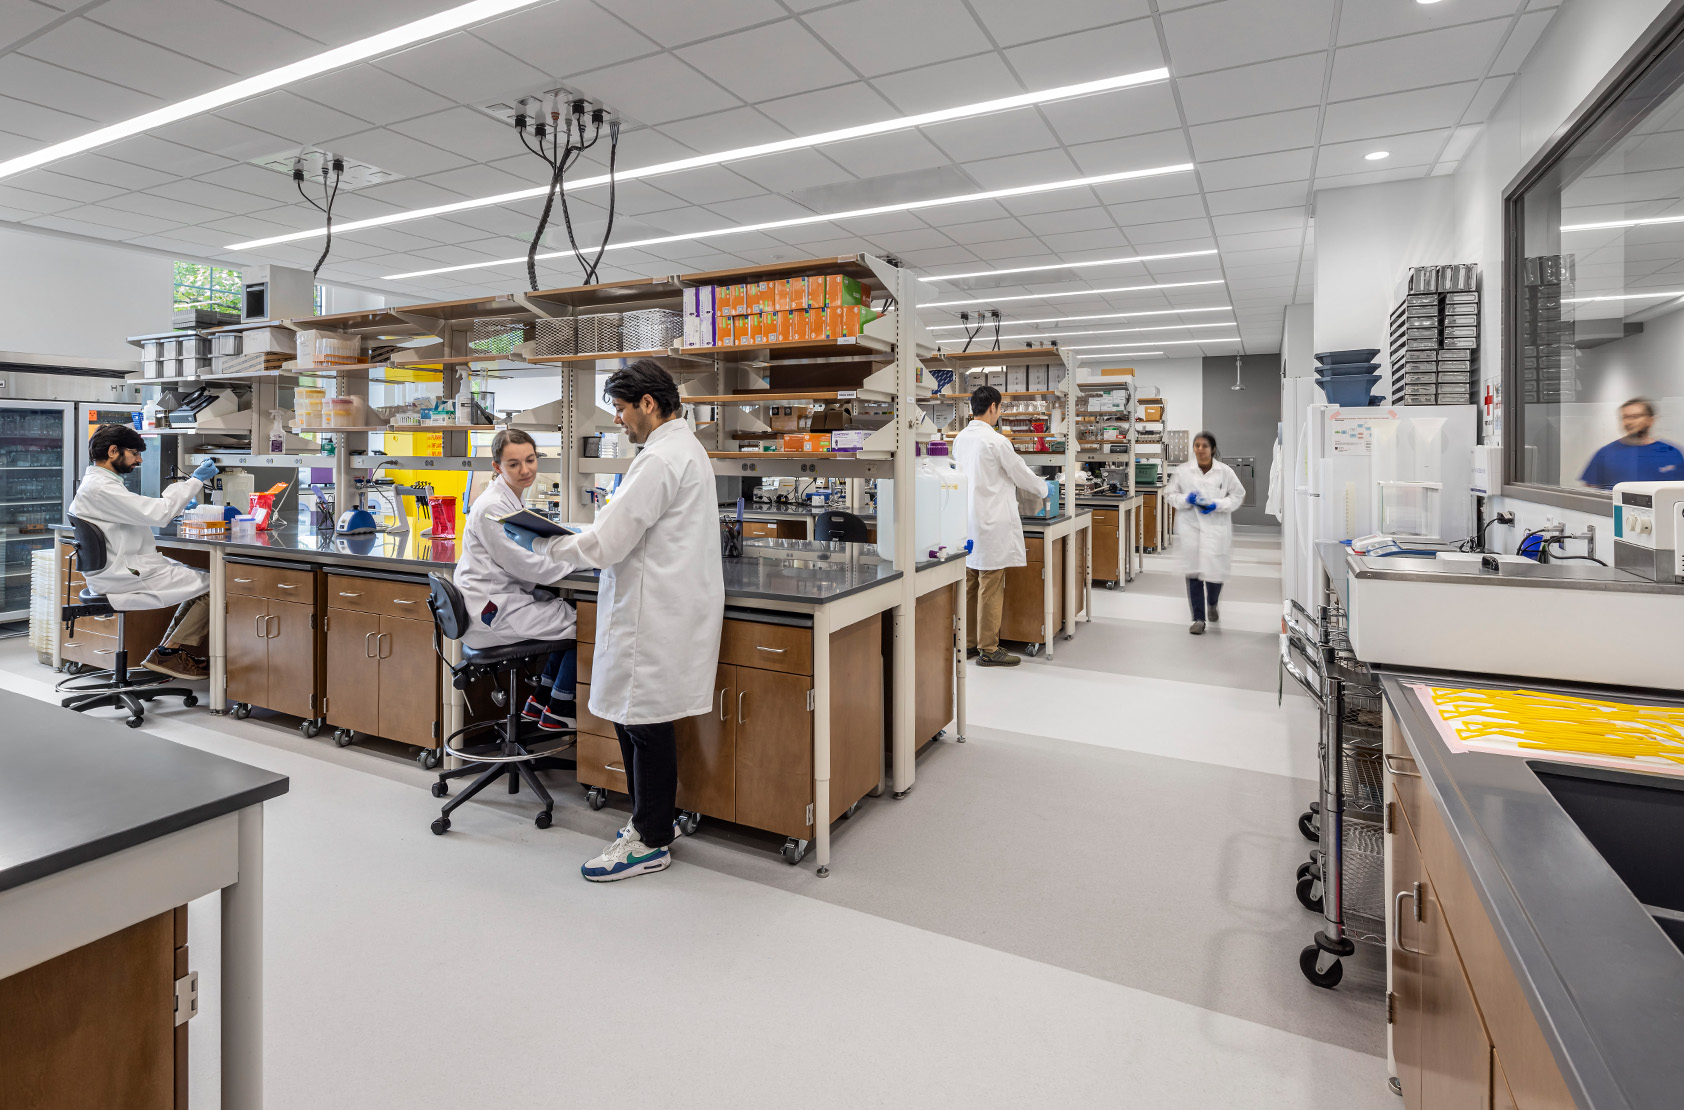 University of Georgia - Poultry Science Complex: Interior of research lab with people